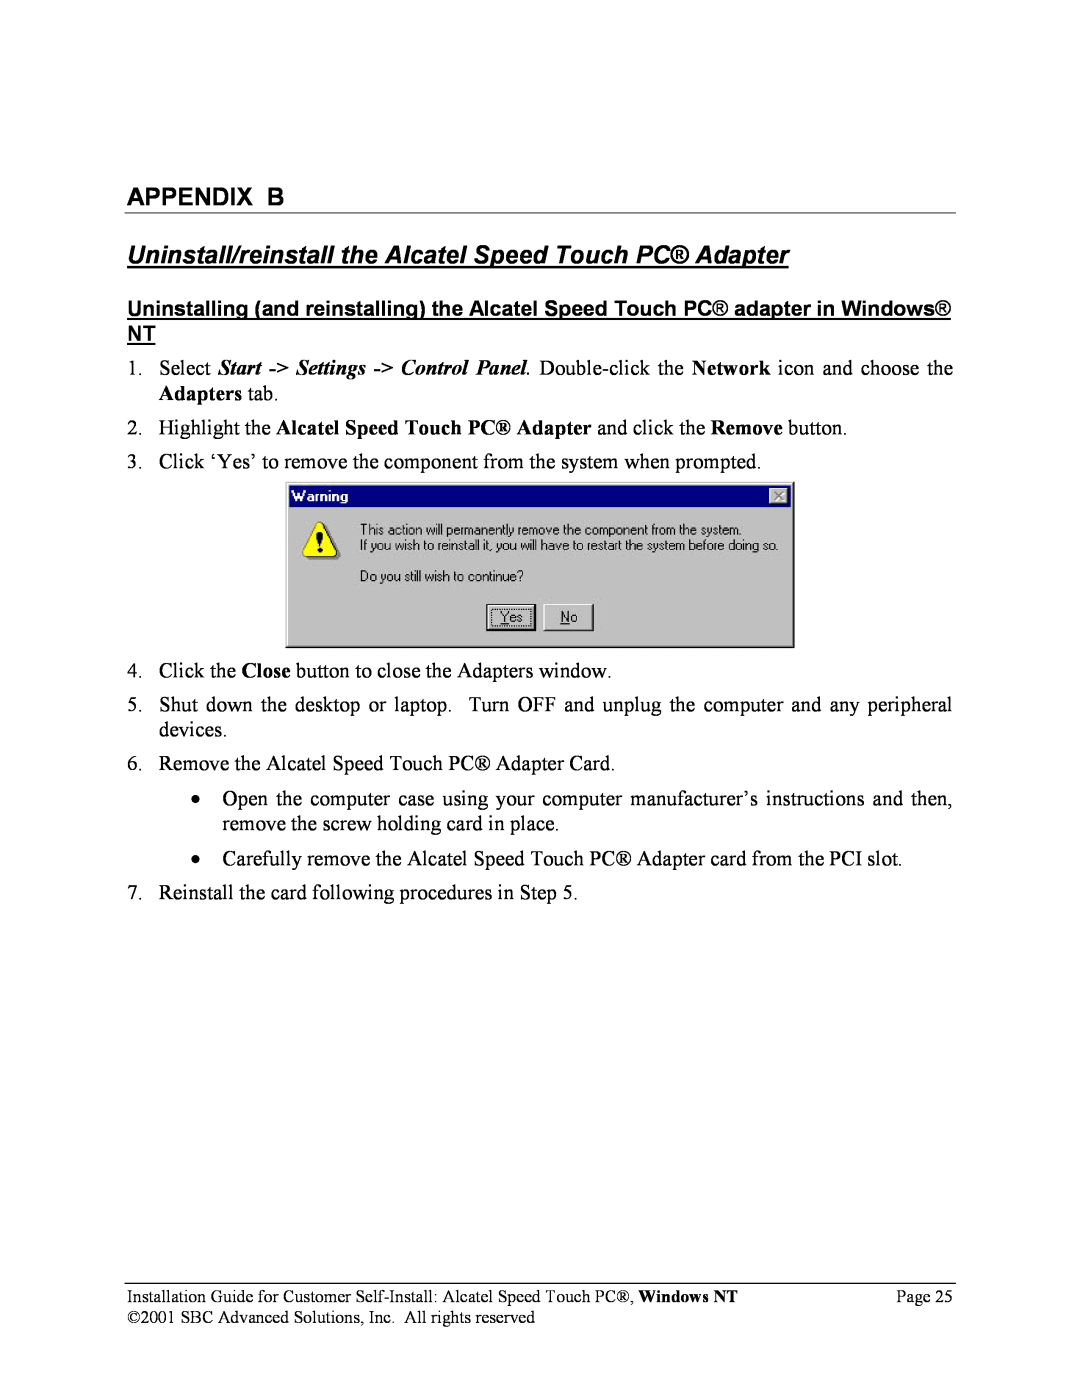 SBC comm PCNT02 manual Appendix B, Uninstall/reinstall the Alcatel Speed Touch PC Adapter 